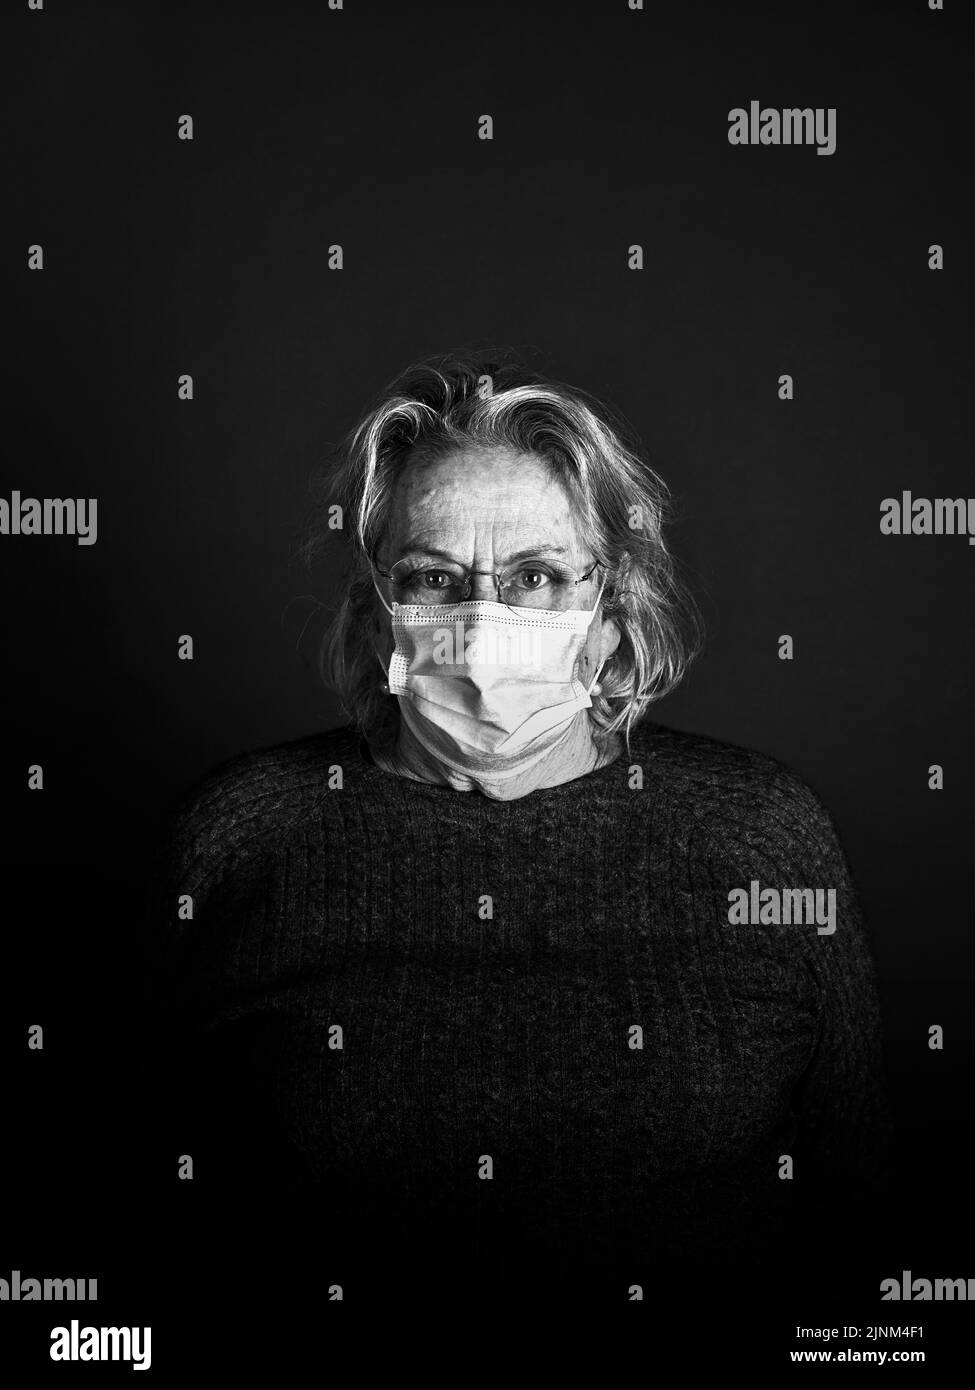 Germaine greer Black and White Stock Photos & Images - Alamy